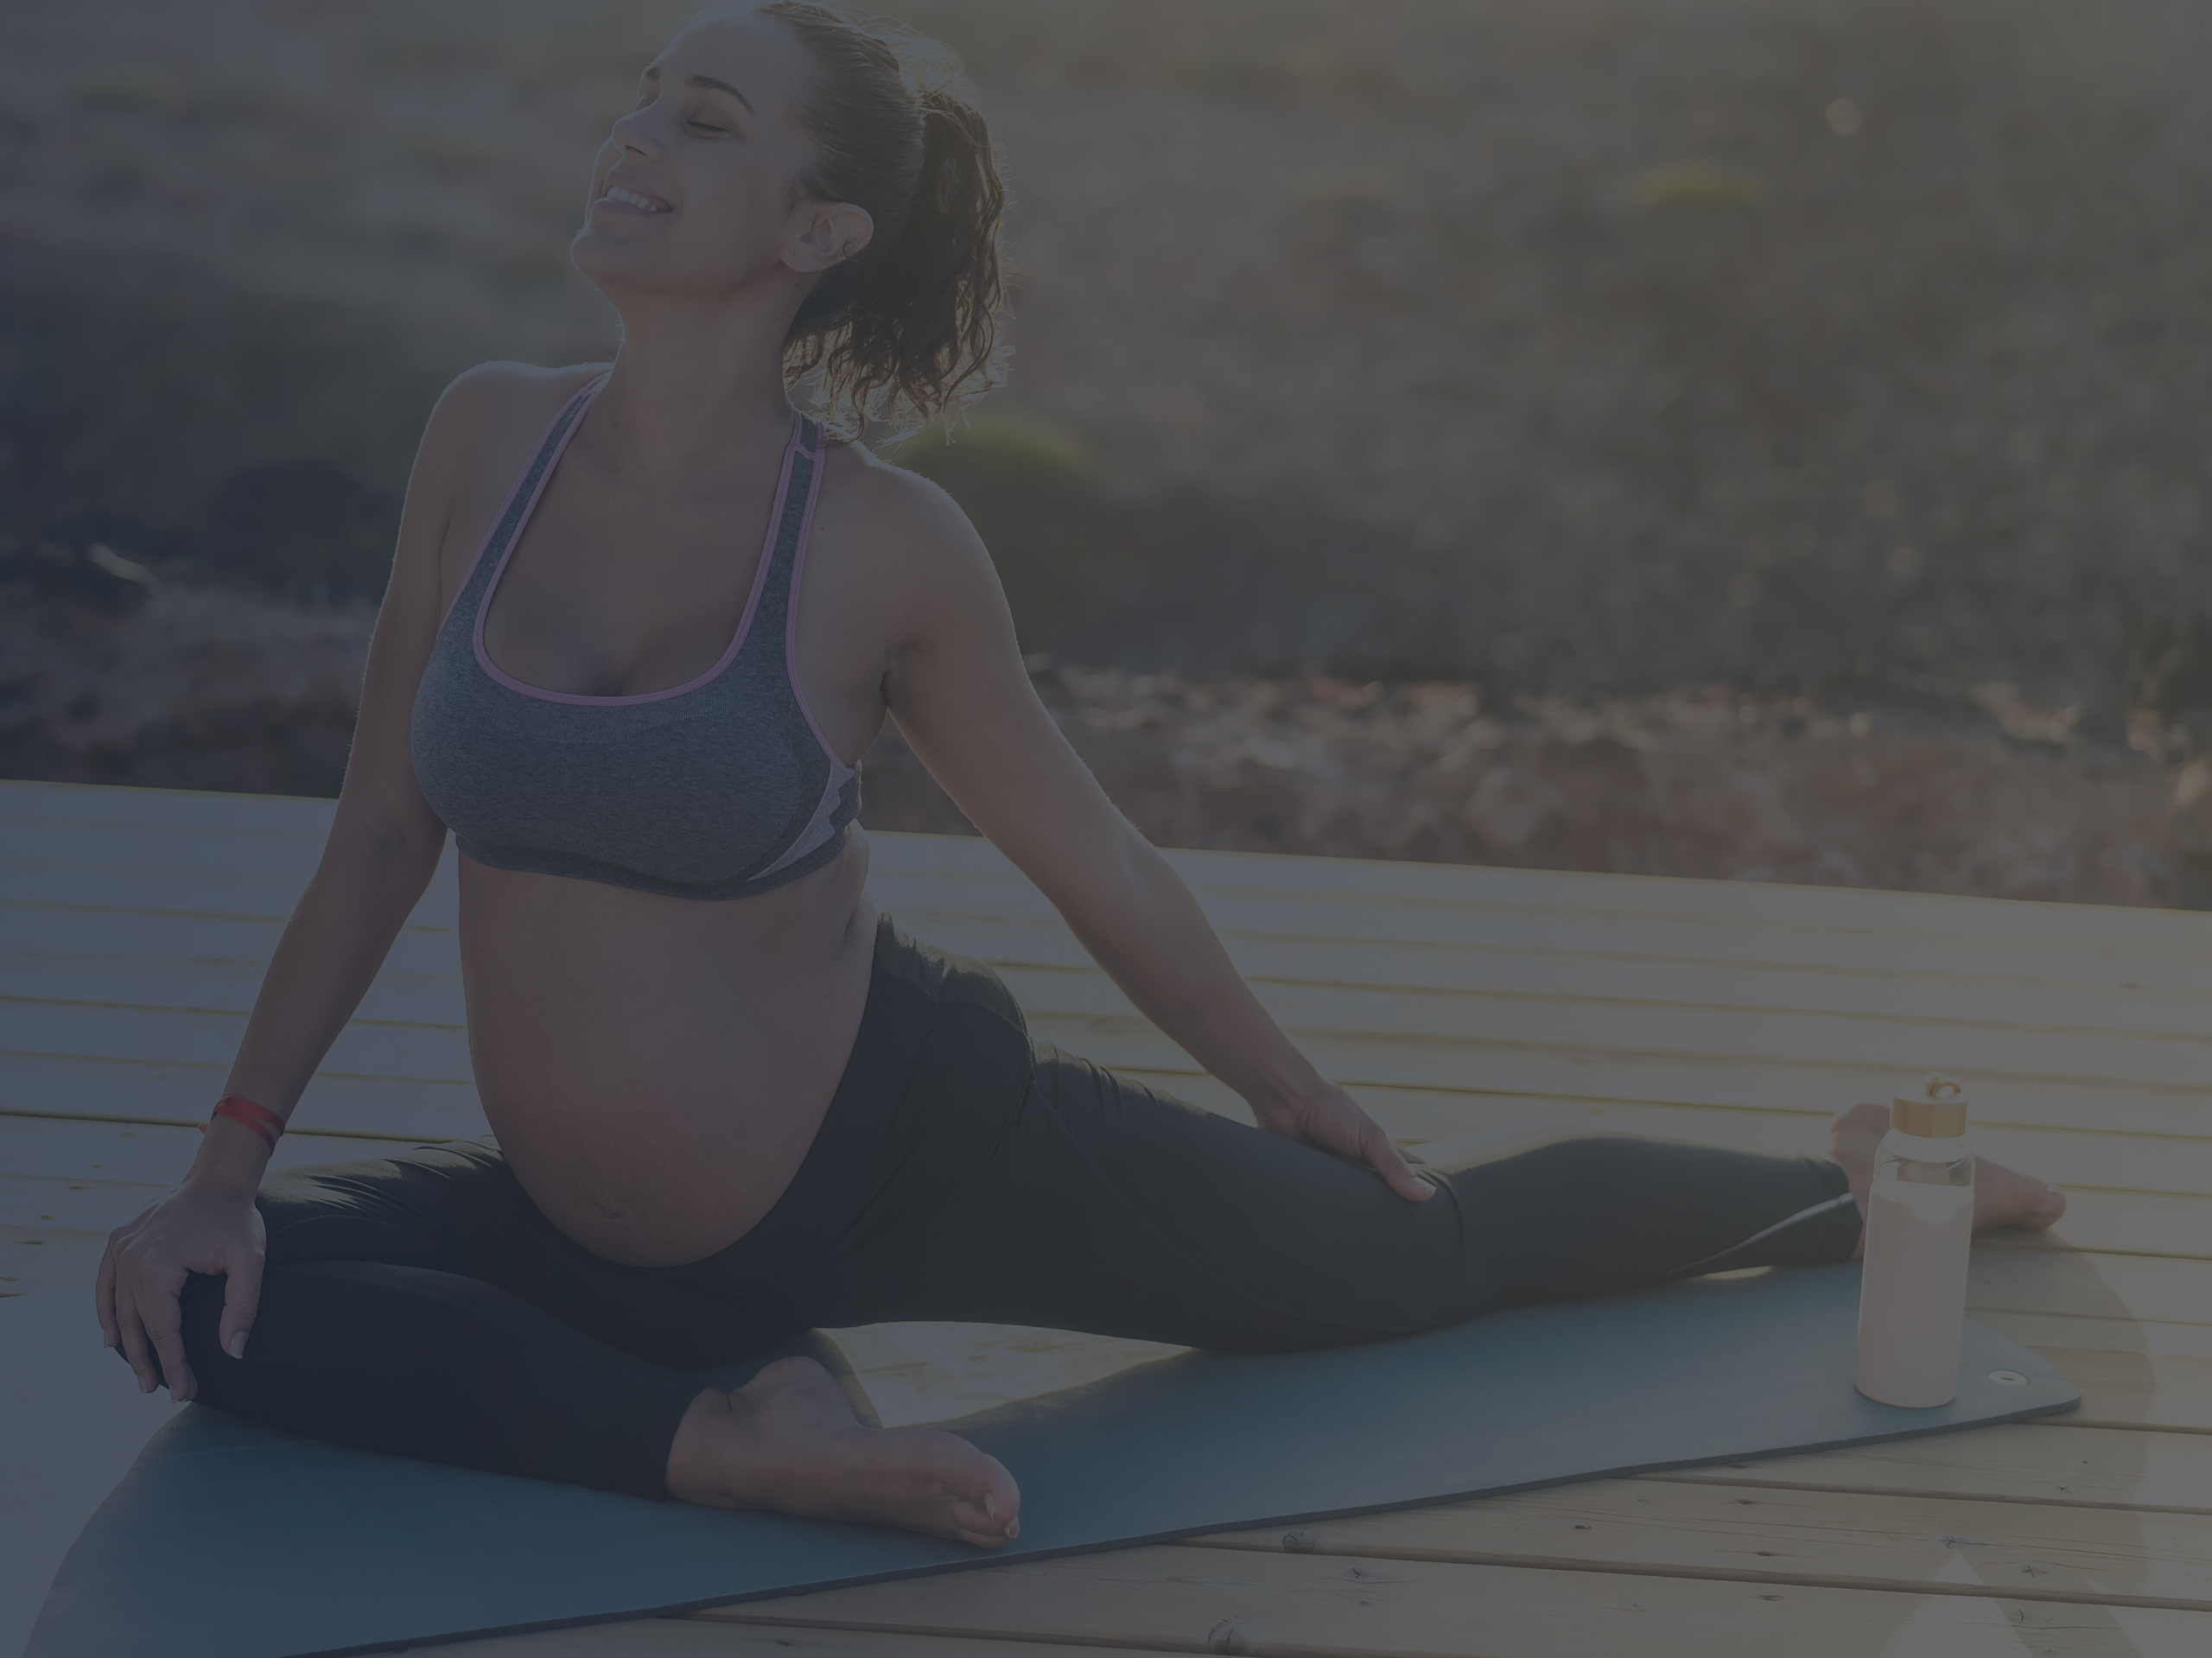 Woman in Second Trimester Doing Prenatal Pilates Exercises